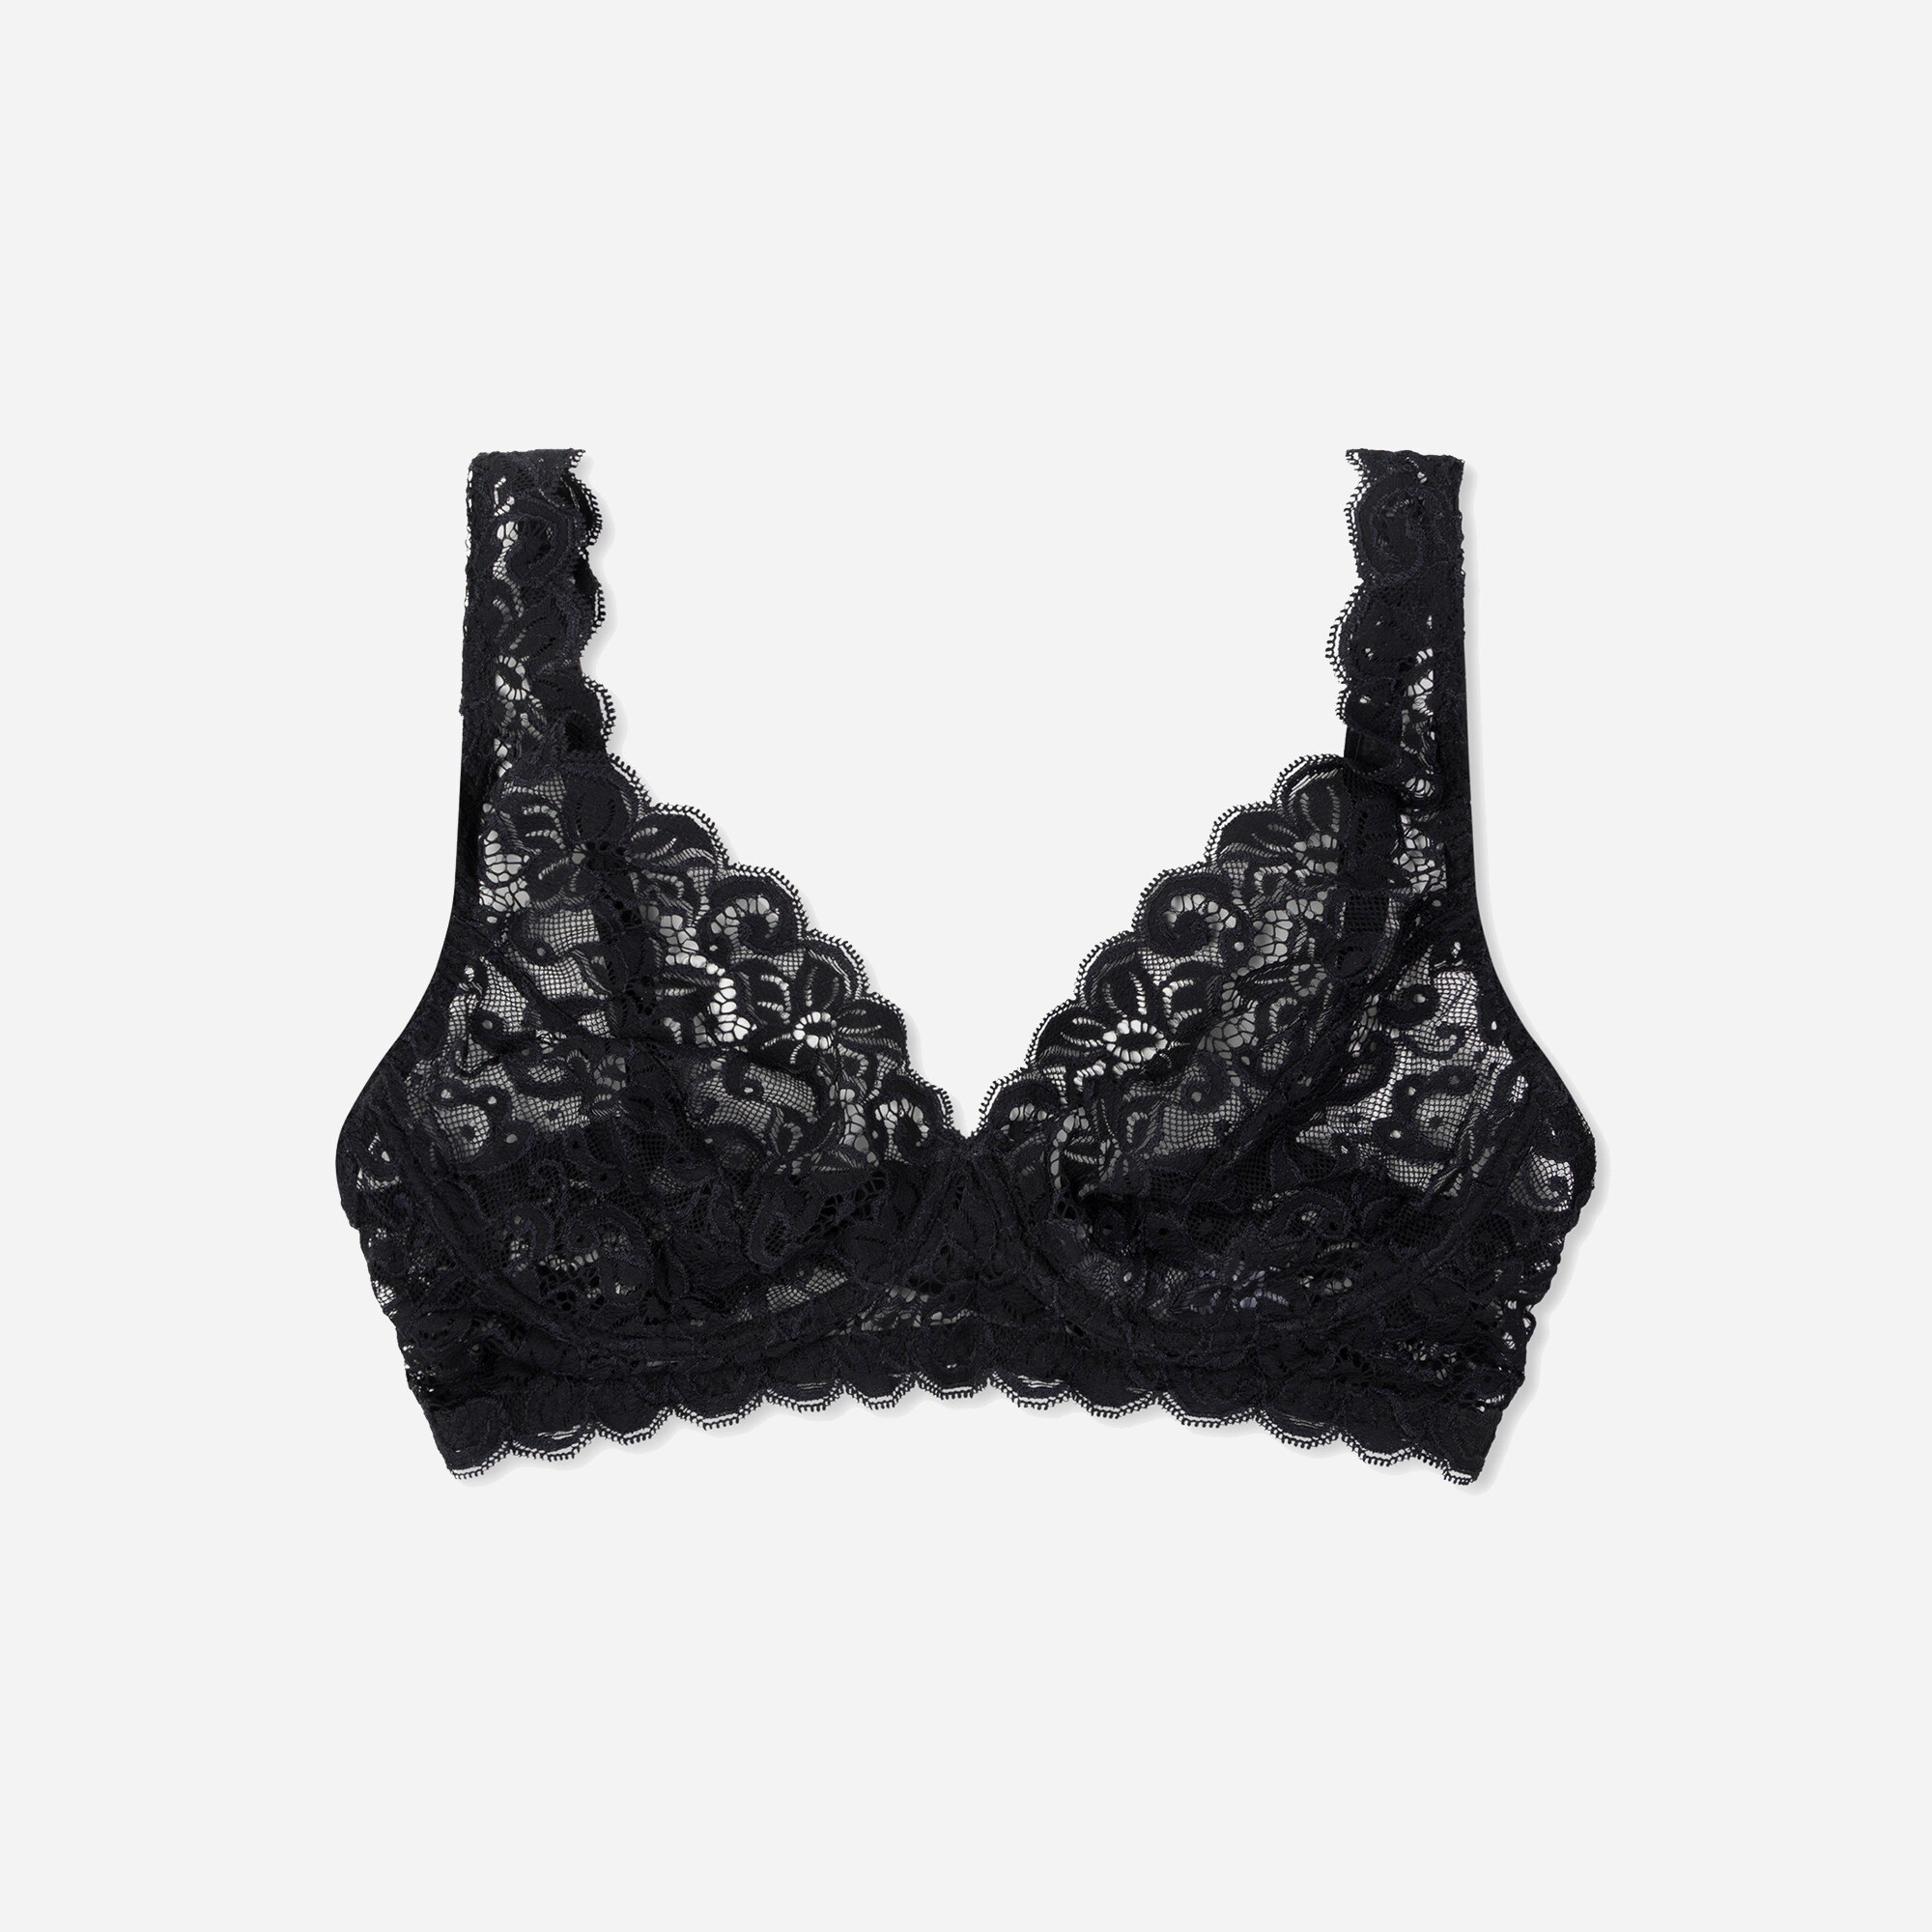 womens HANRO® luxury moments lace soft cup bra